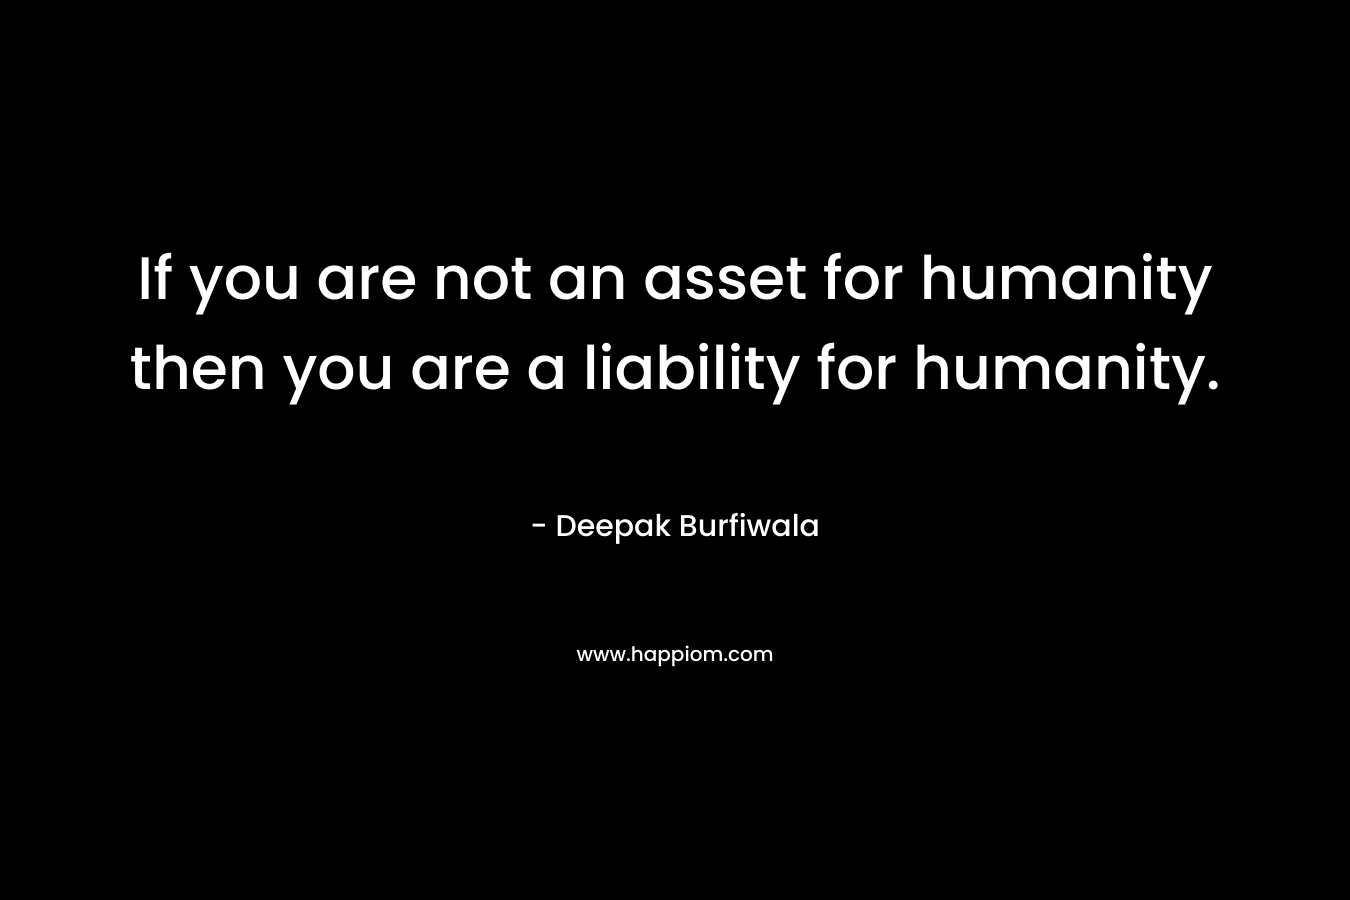 If you are not an asset for humanity then you are a liability for humanity.